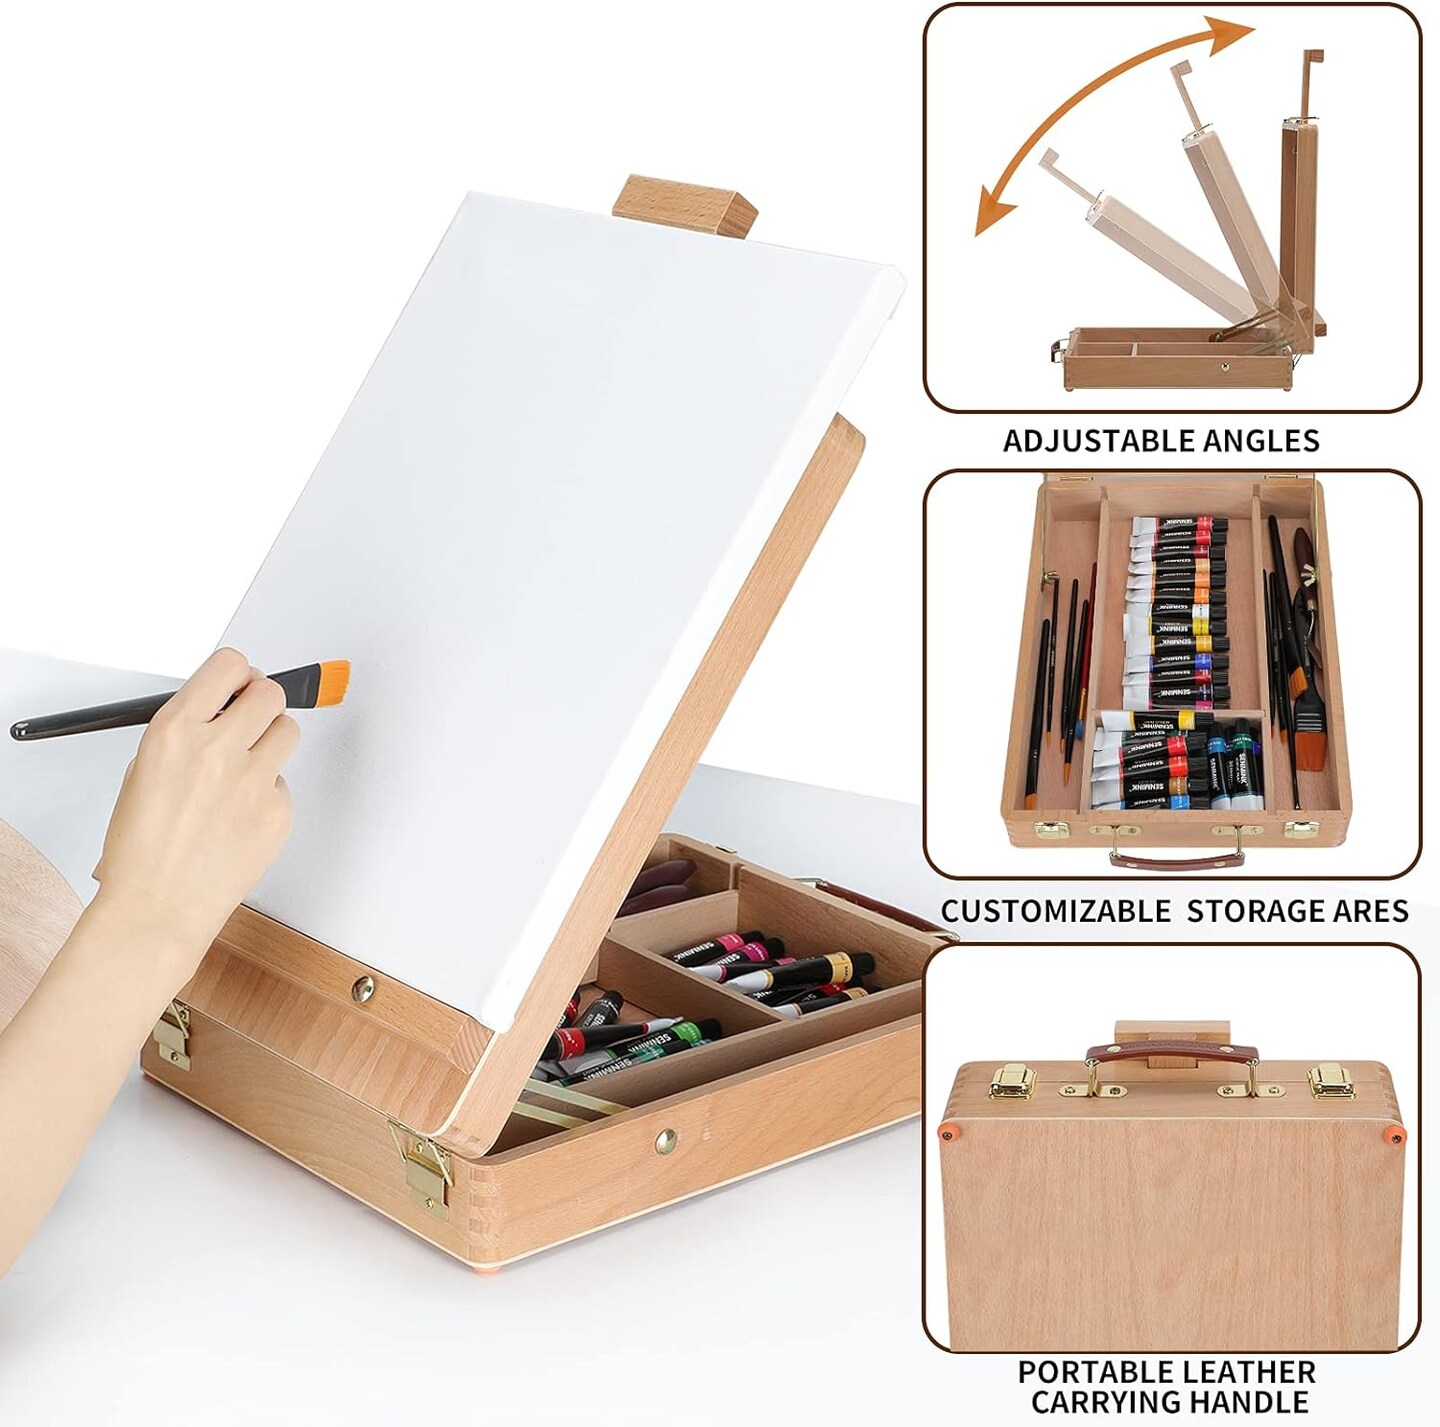 69 Pcs Artists Painting Set with Wood Box Easel&#xFF0C;48&#xD7;12ML Acrylic Painting Set, Canvas 9x12 inches, Wood Palette, Palette Knife Art Supplies, Paint Set for Adults Beginners